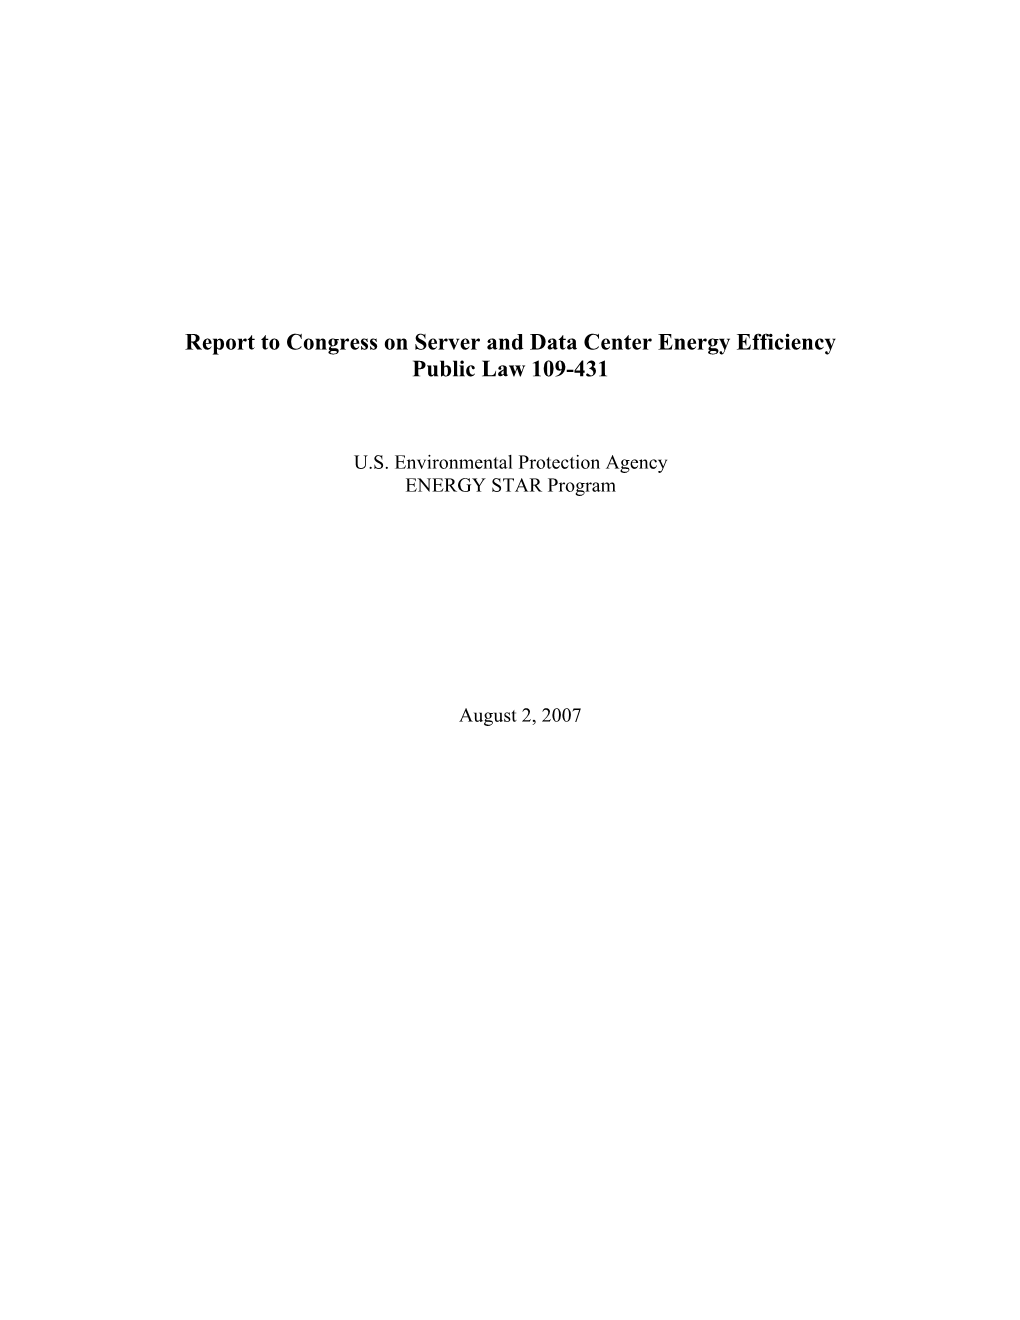 EPA Report to Congress on Server and Data Center Energy Efficiency